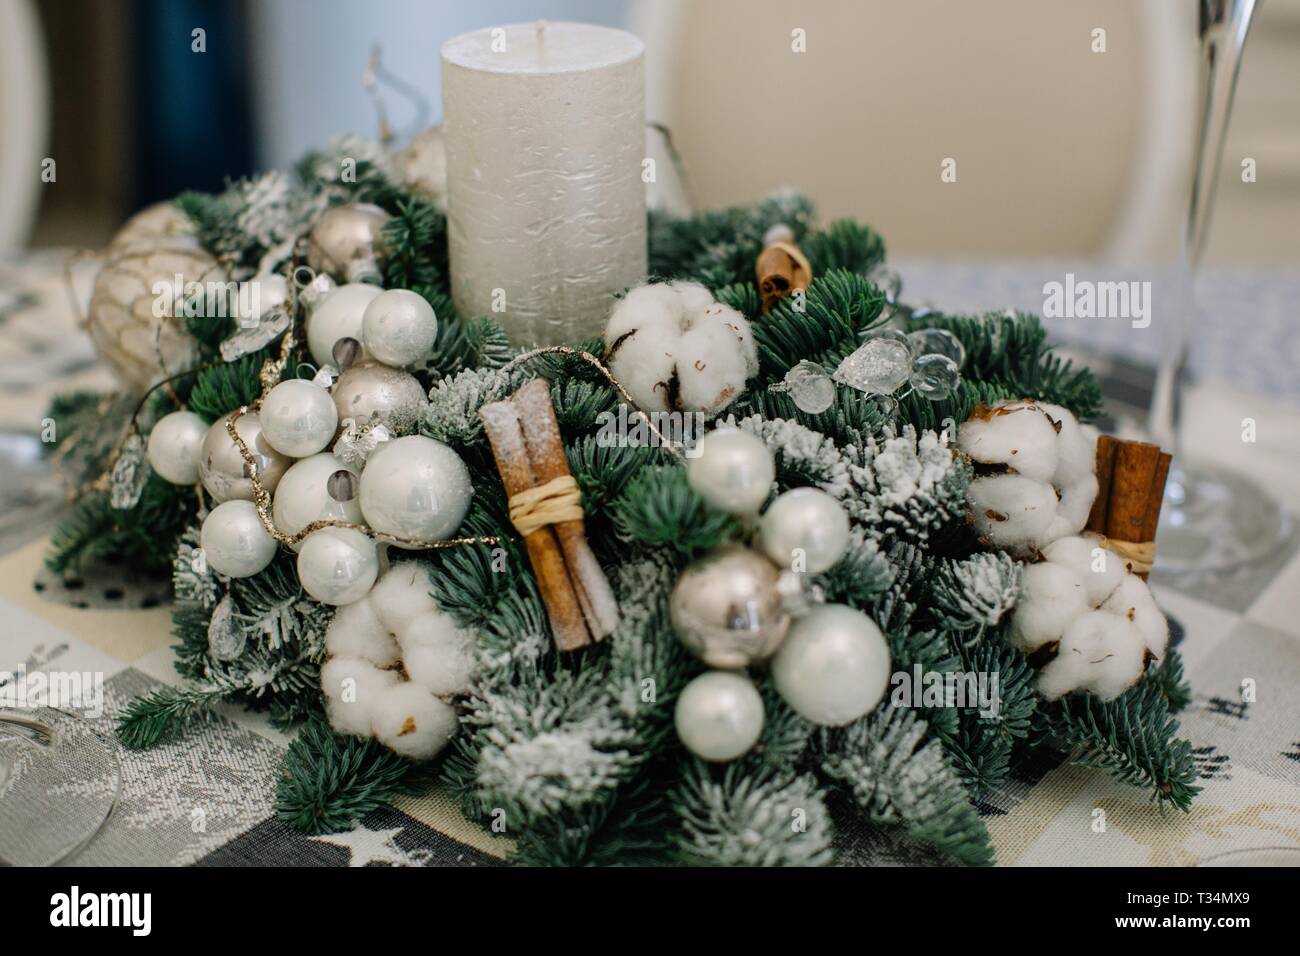 Christmas decoration on a table Stock Photo